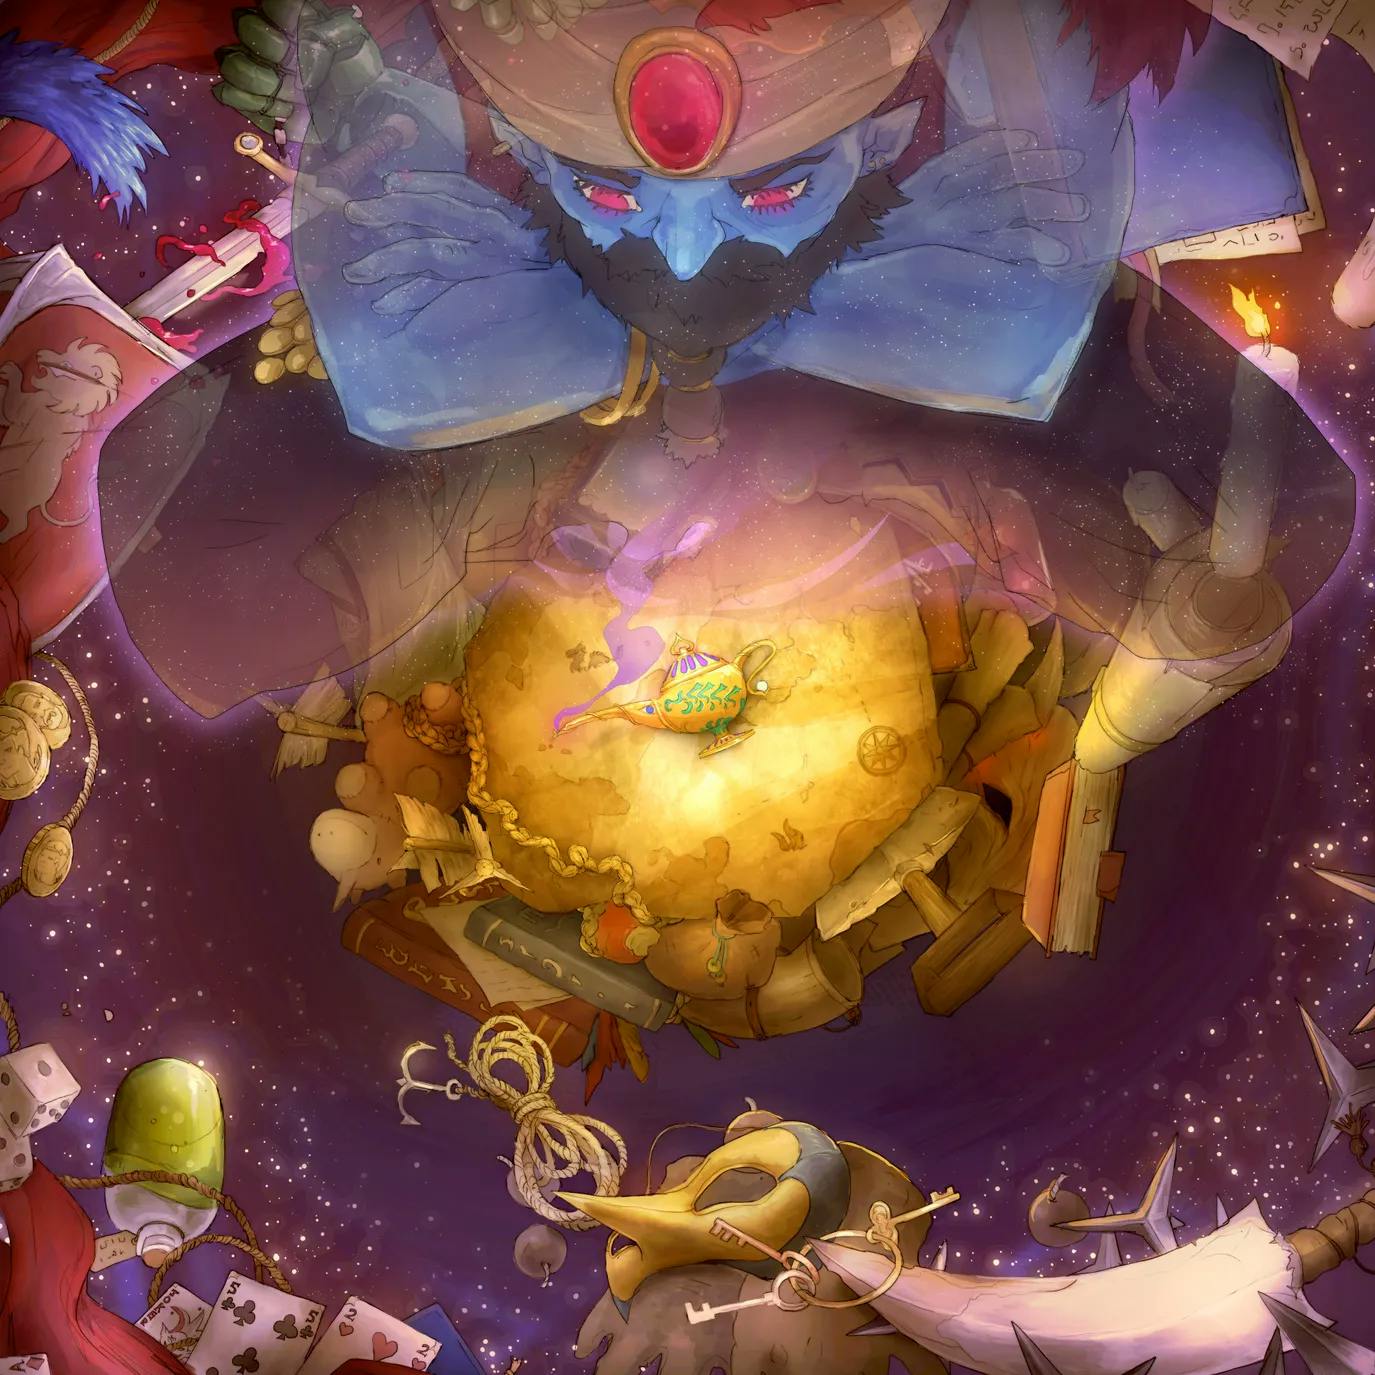 Inside a Bag of Holding map, Genie variant thumbnail